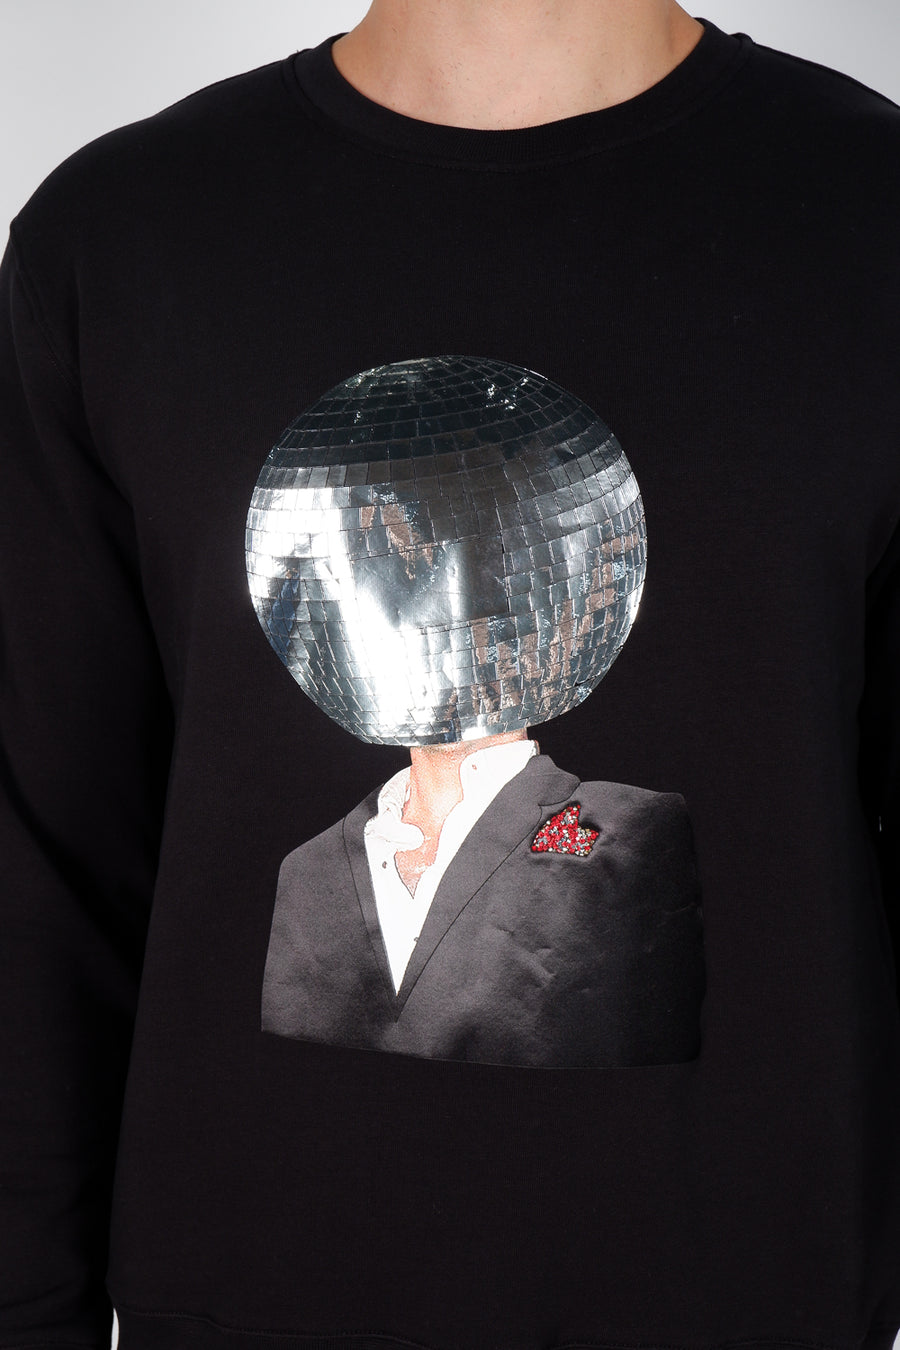 Buy the Limitato Disco Face Sweatshirt Black at Intro. Spend £50 for free UK delivery. Official stockists. We ship worldwide.